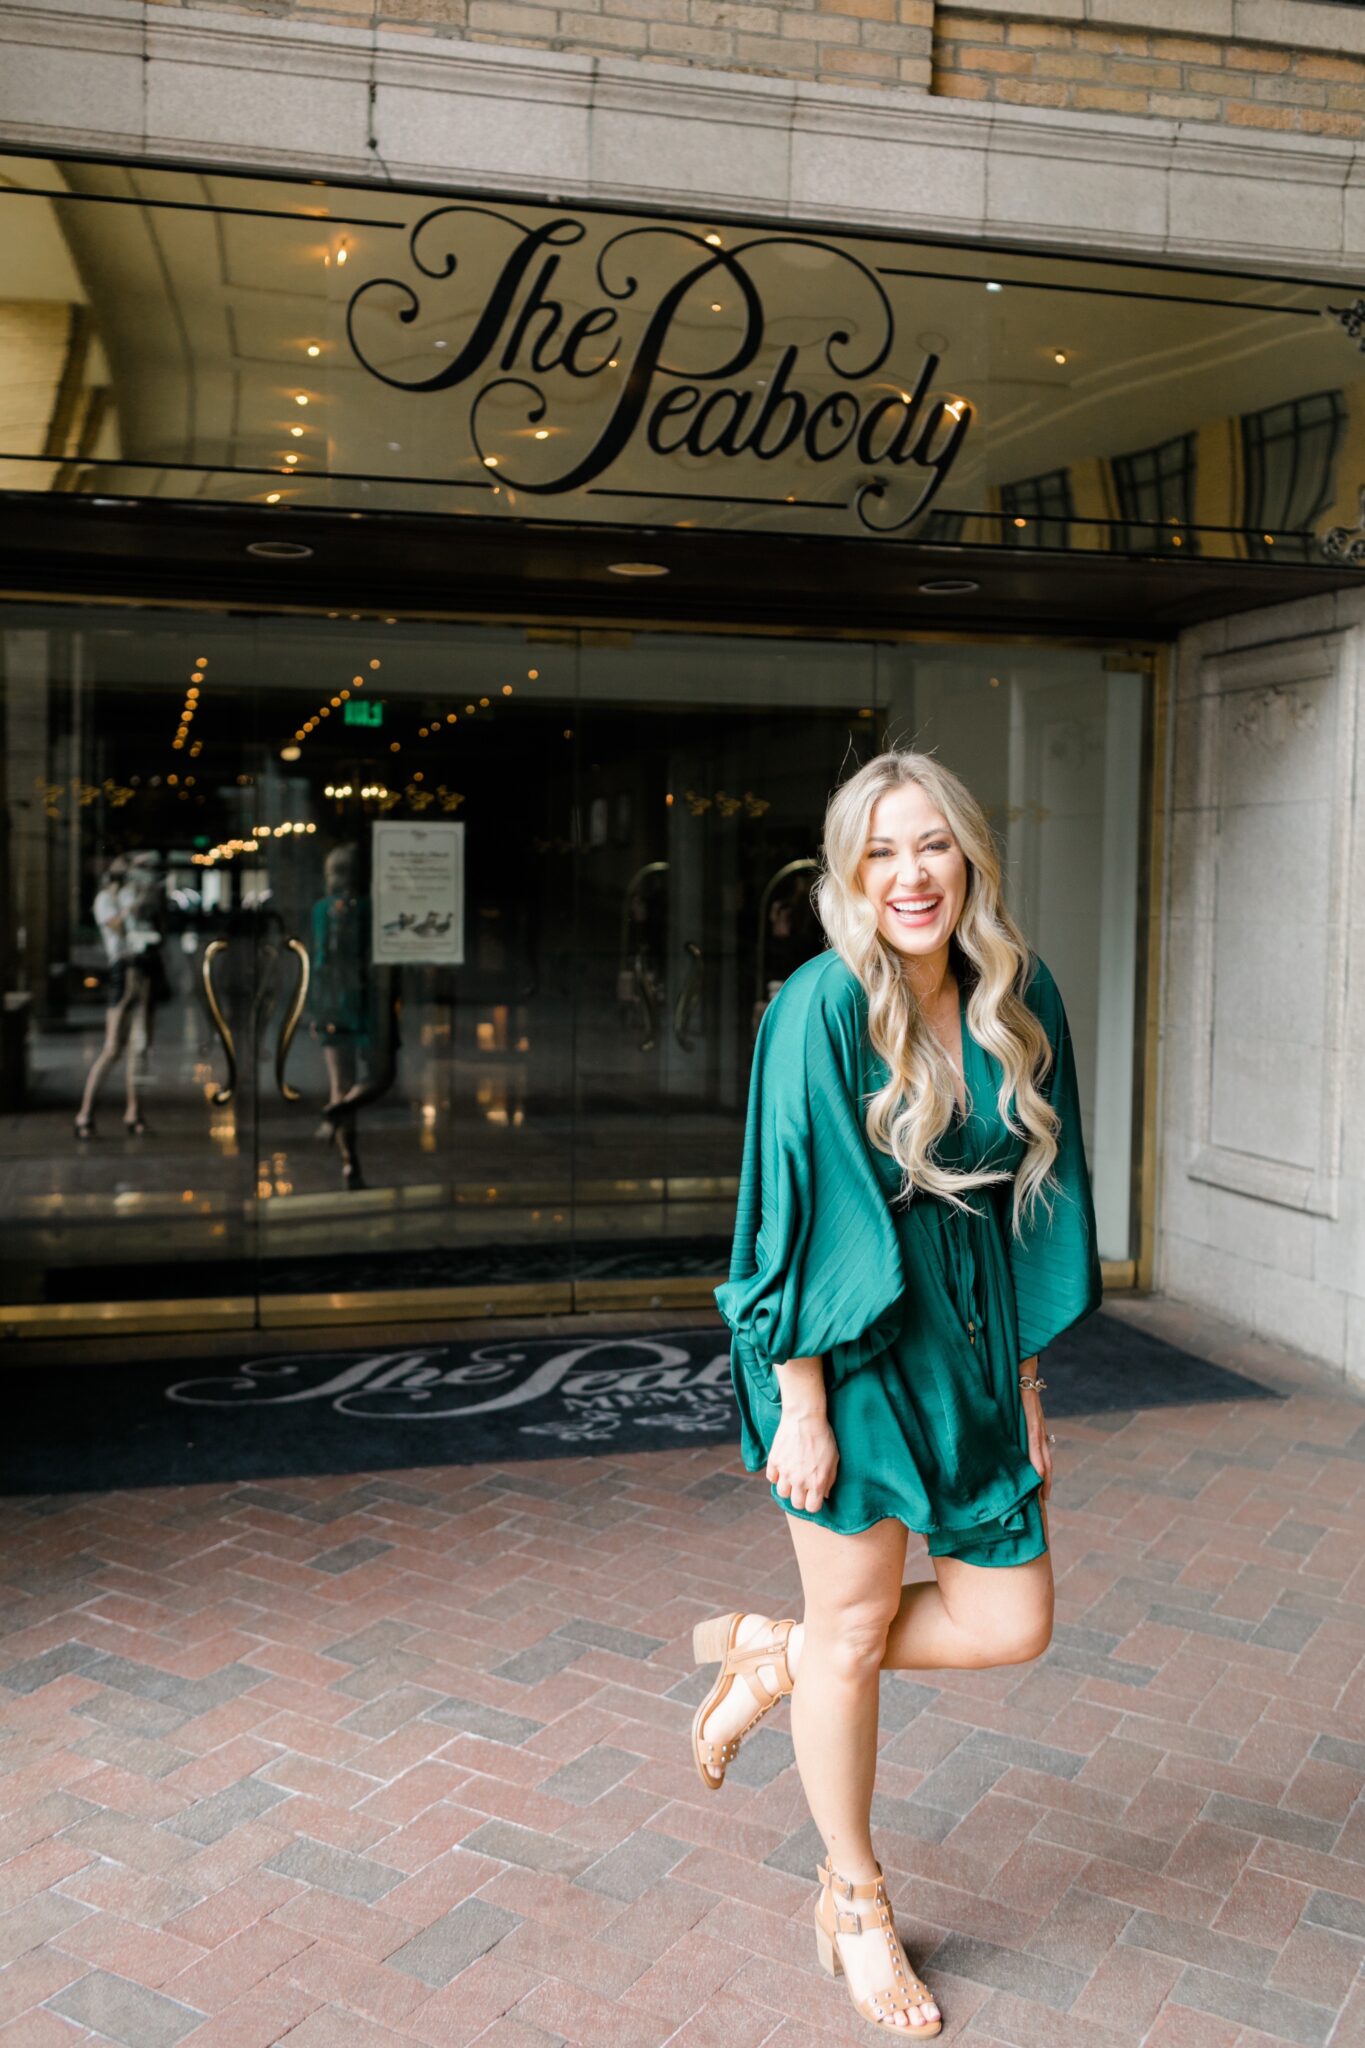 mother's day giveaway outfit: girl in green dress at Peabody hotel